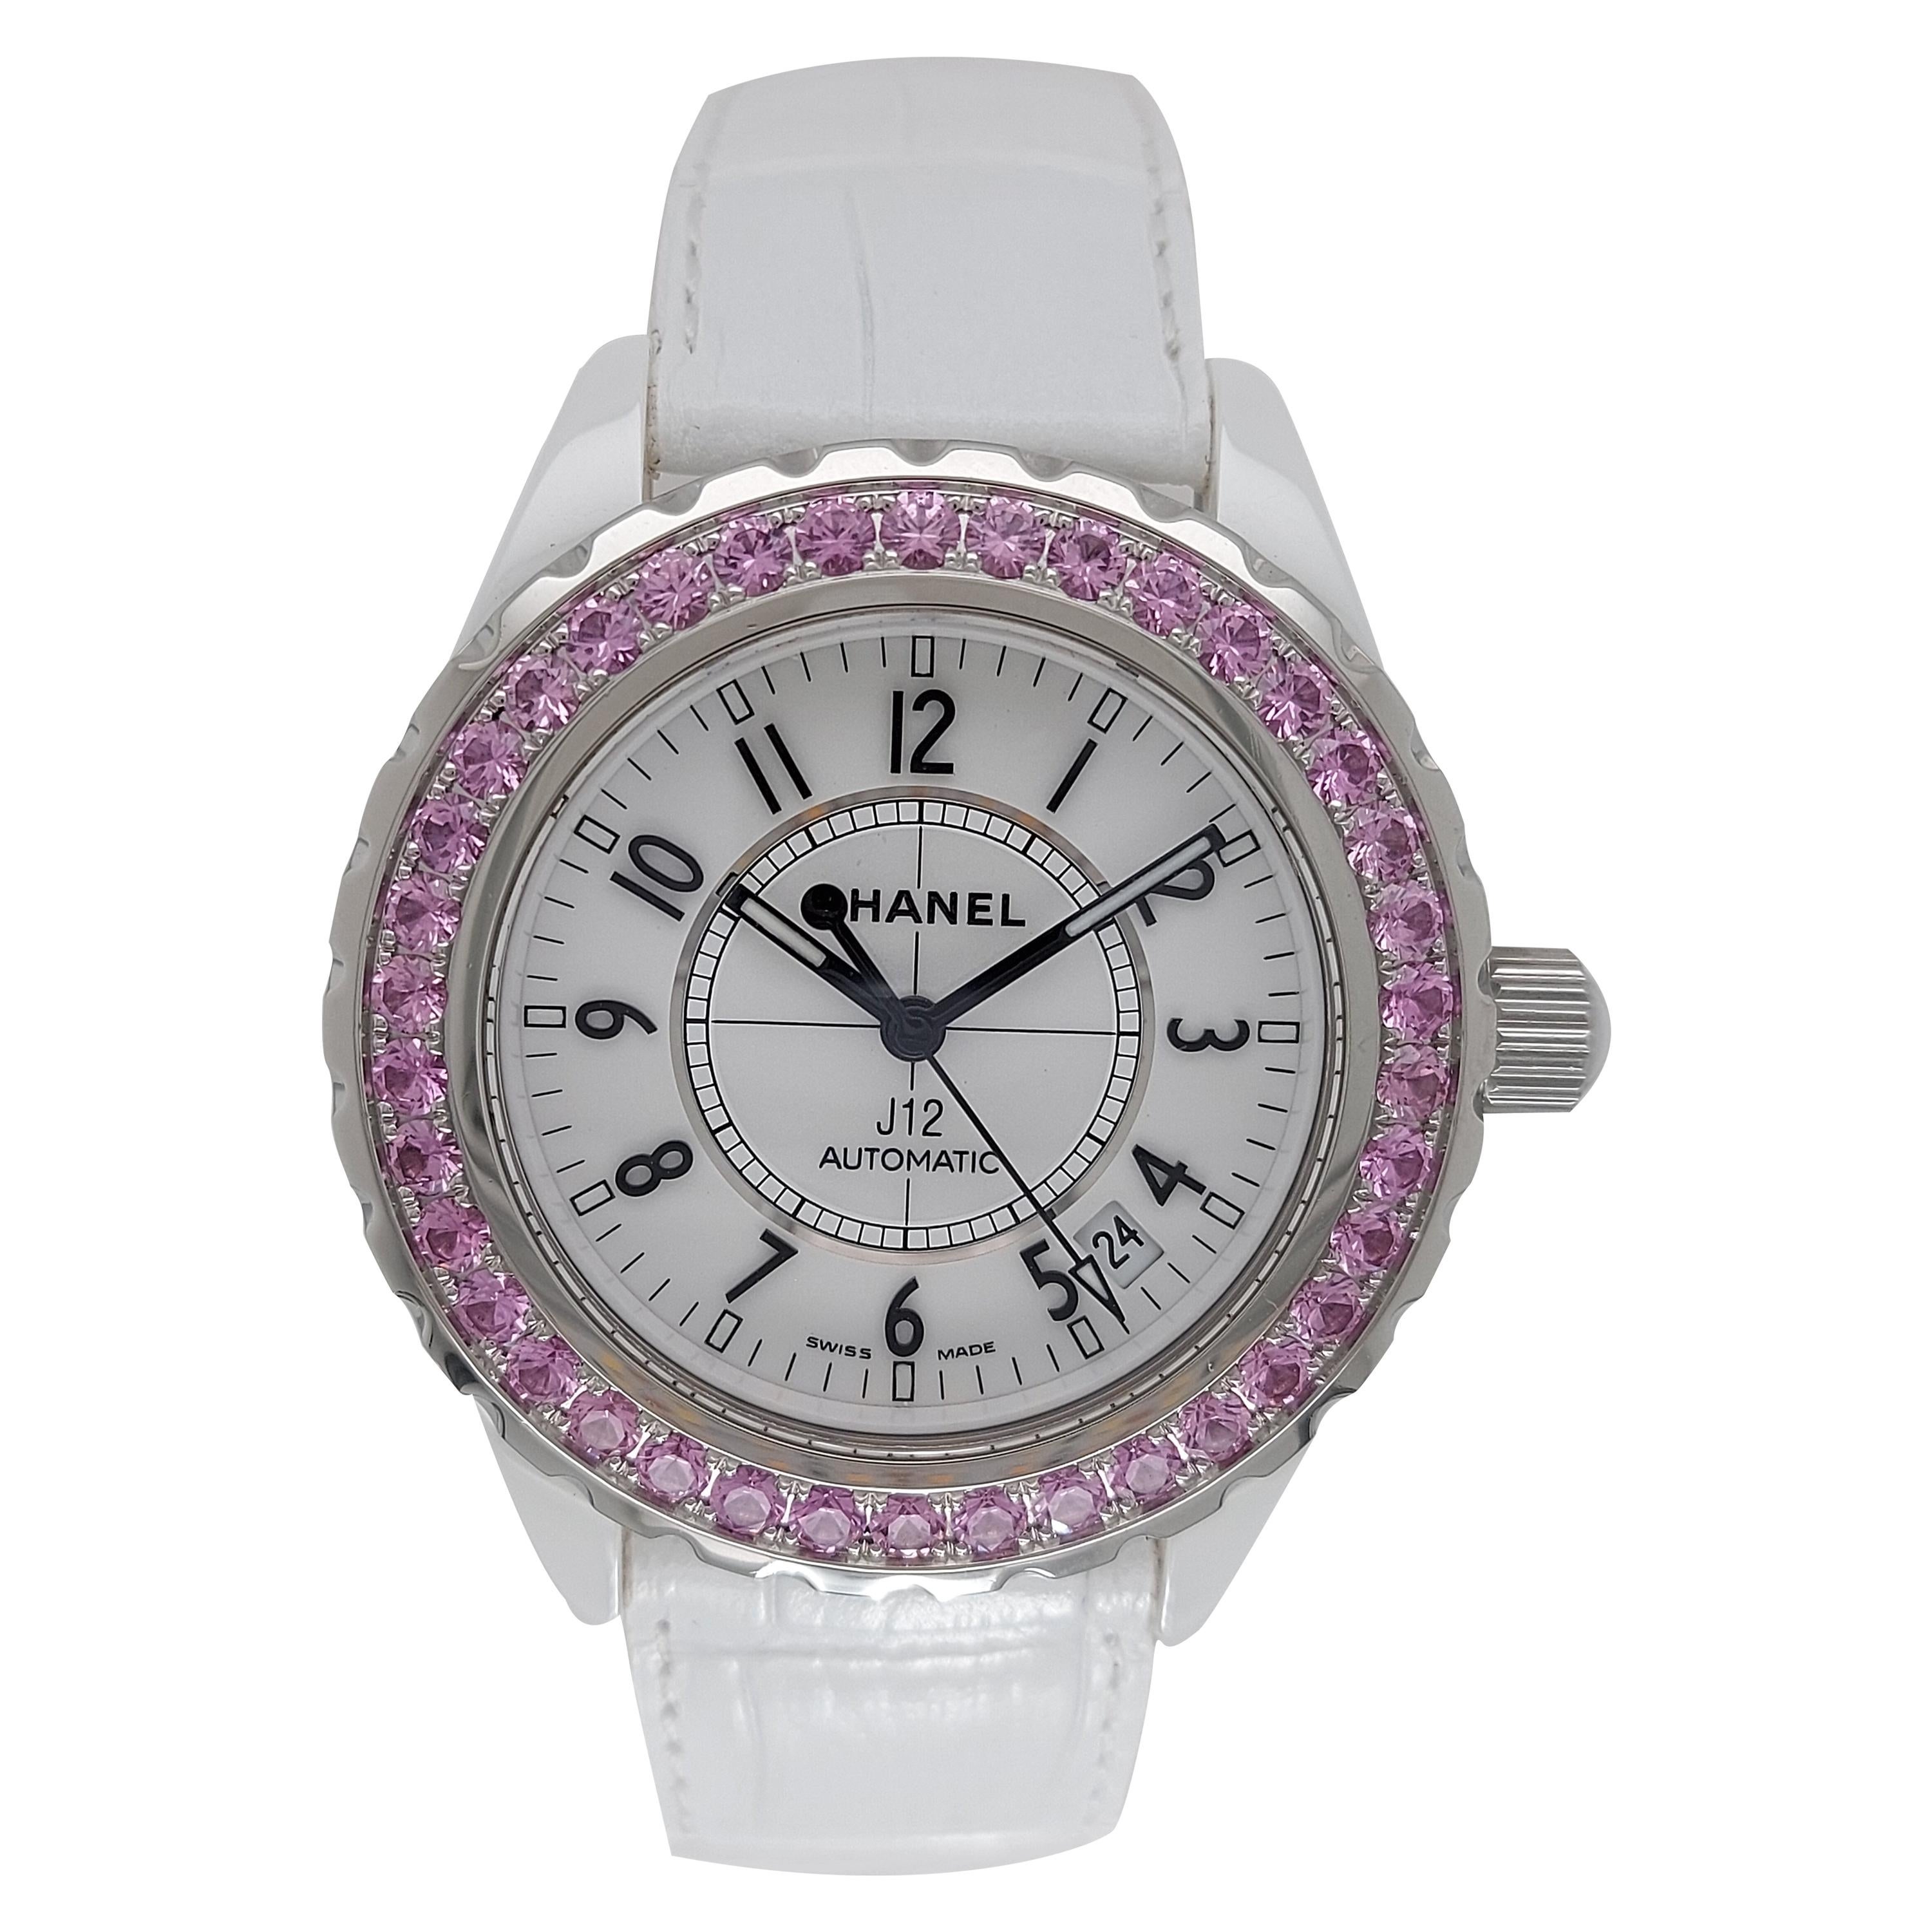 Chanel J12, Automatic, Ceramic Case, with Pink Sapphires